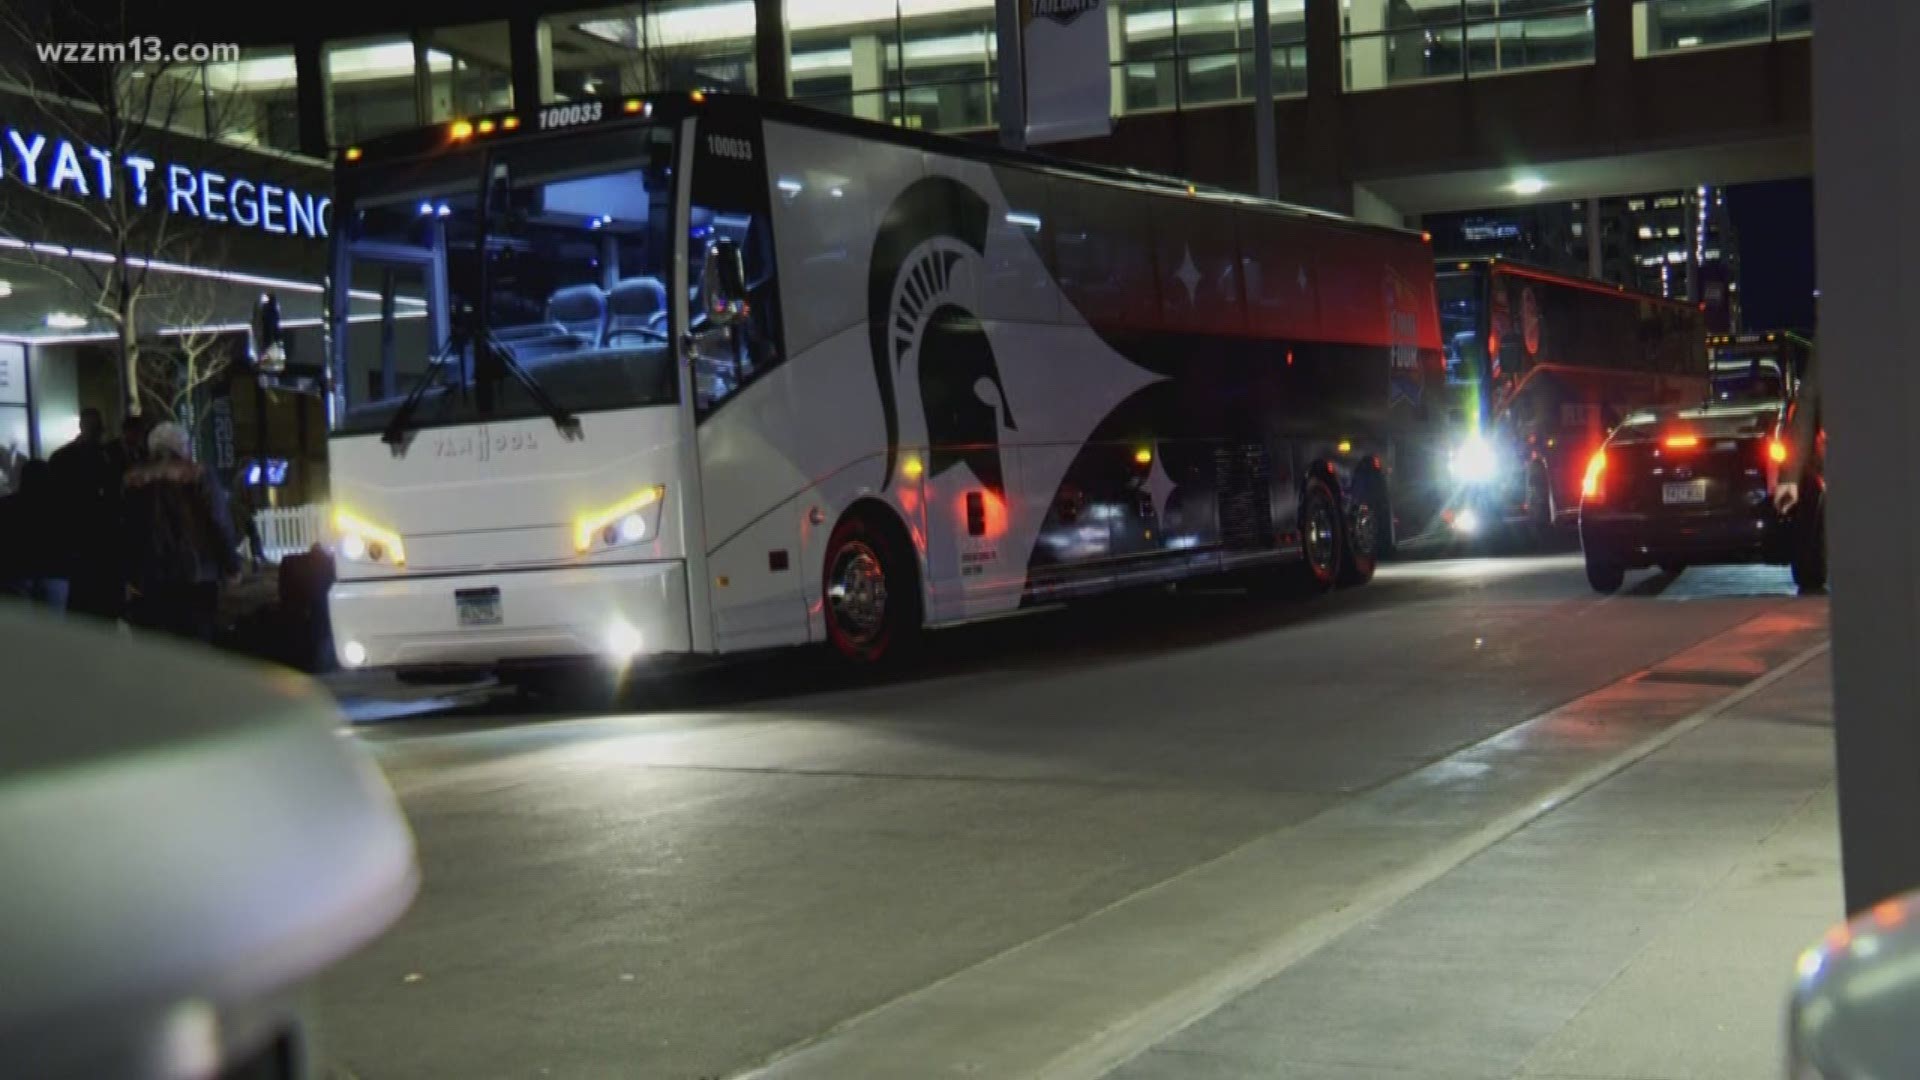 The Spartans have made it safely to the Twin Cities for the Final Four weekend. They will face Texas Tech for the chance to move on to the title game.